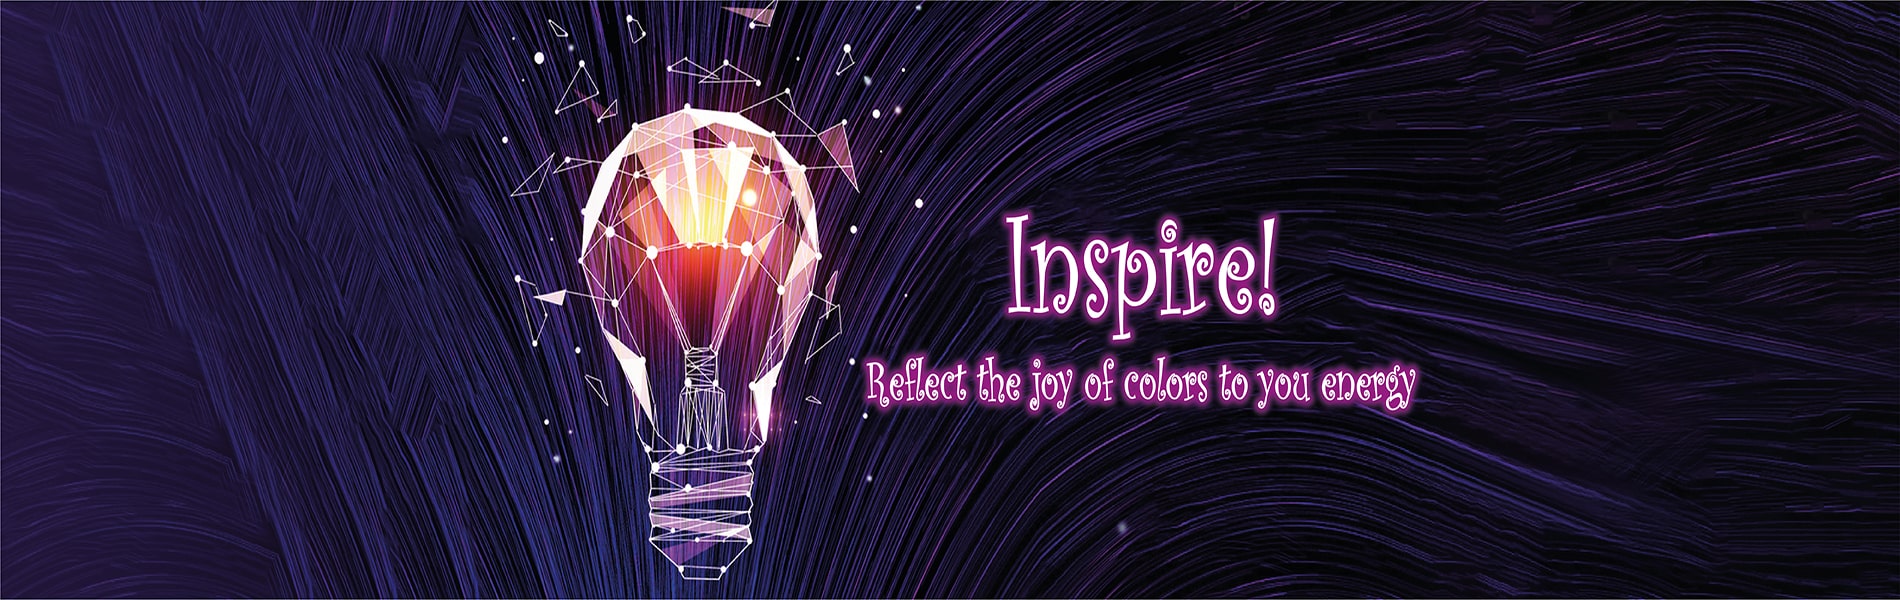 Inspire! Reflect the joj of colors to your energy!